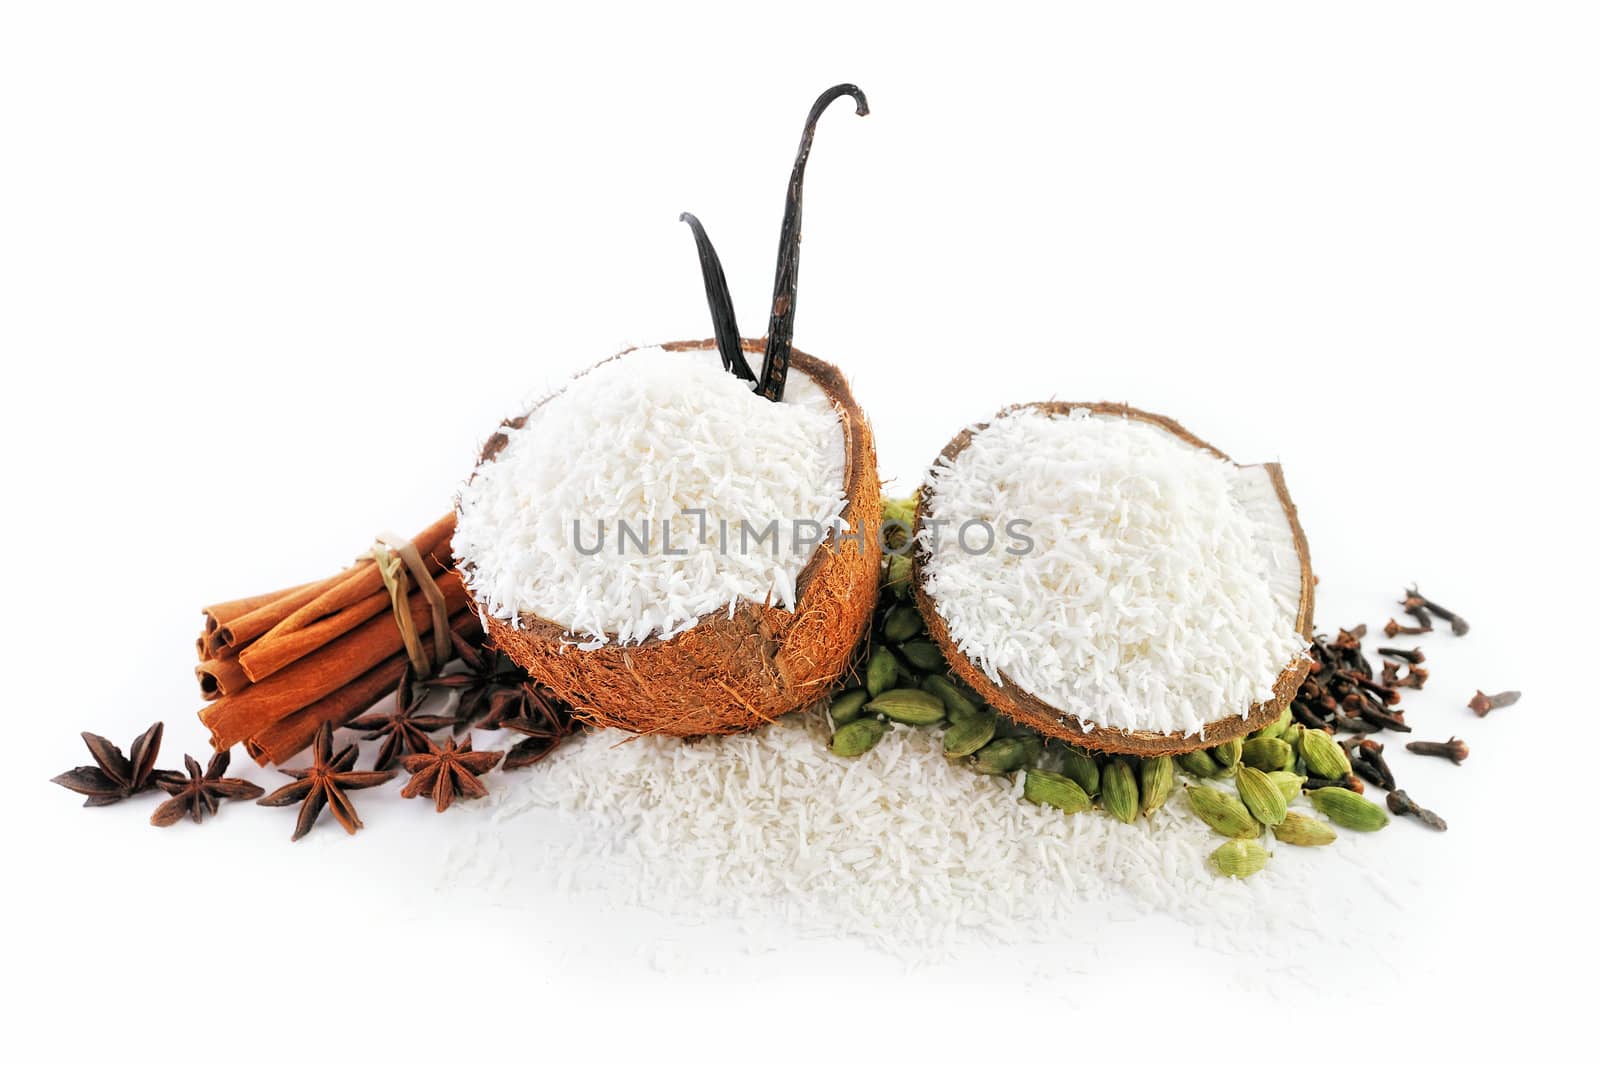 Halves of coconut parts is filled with crumbs and spice